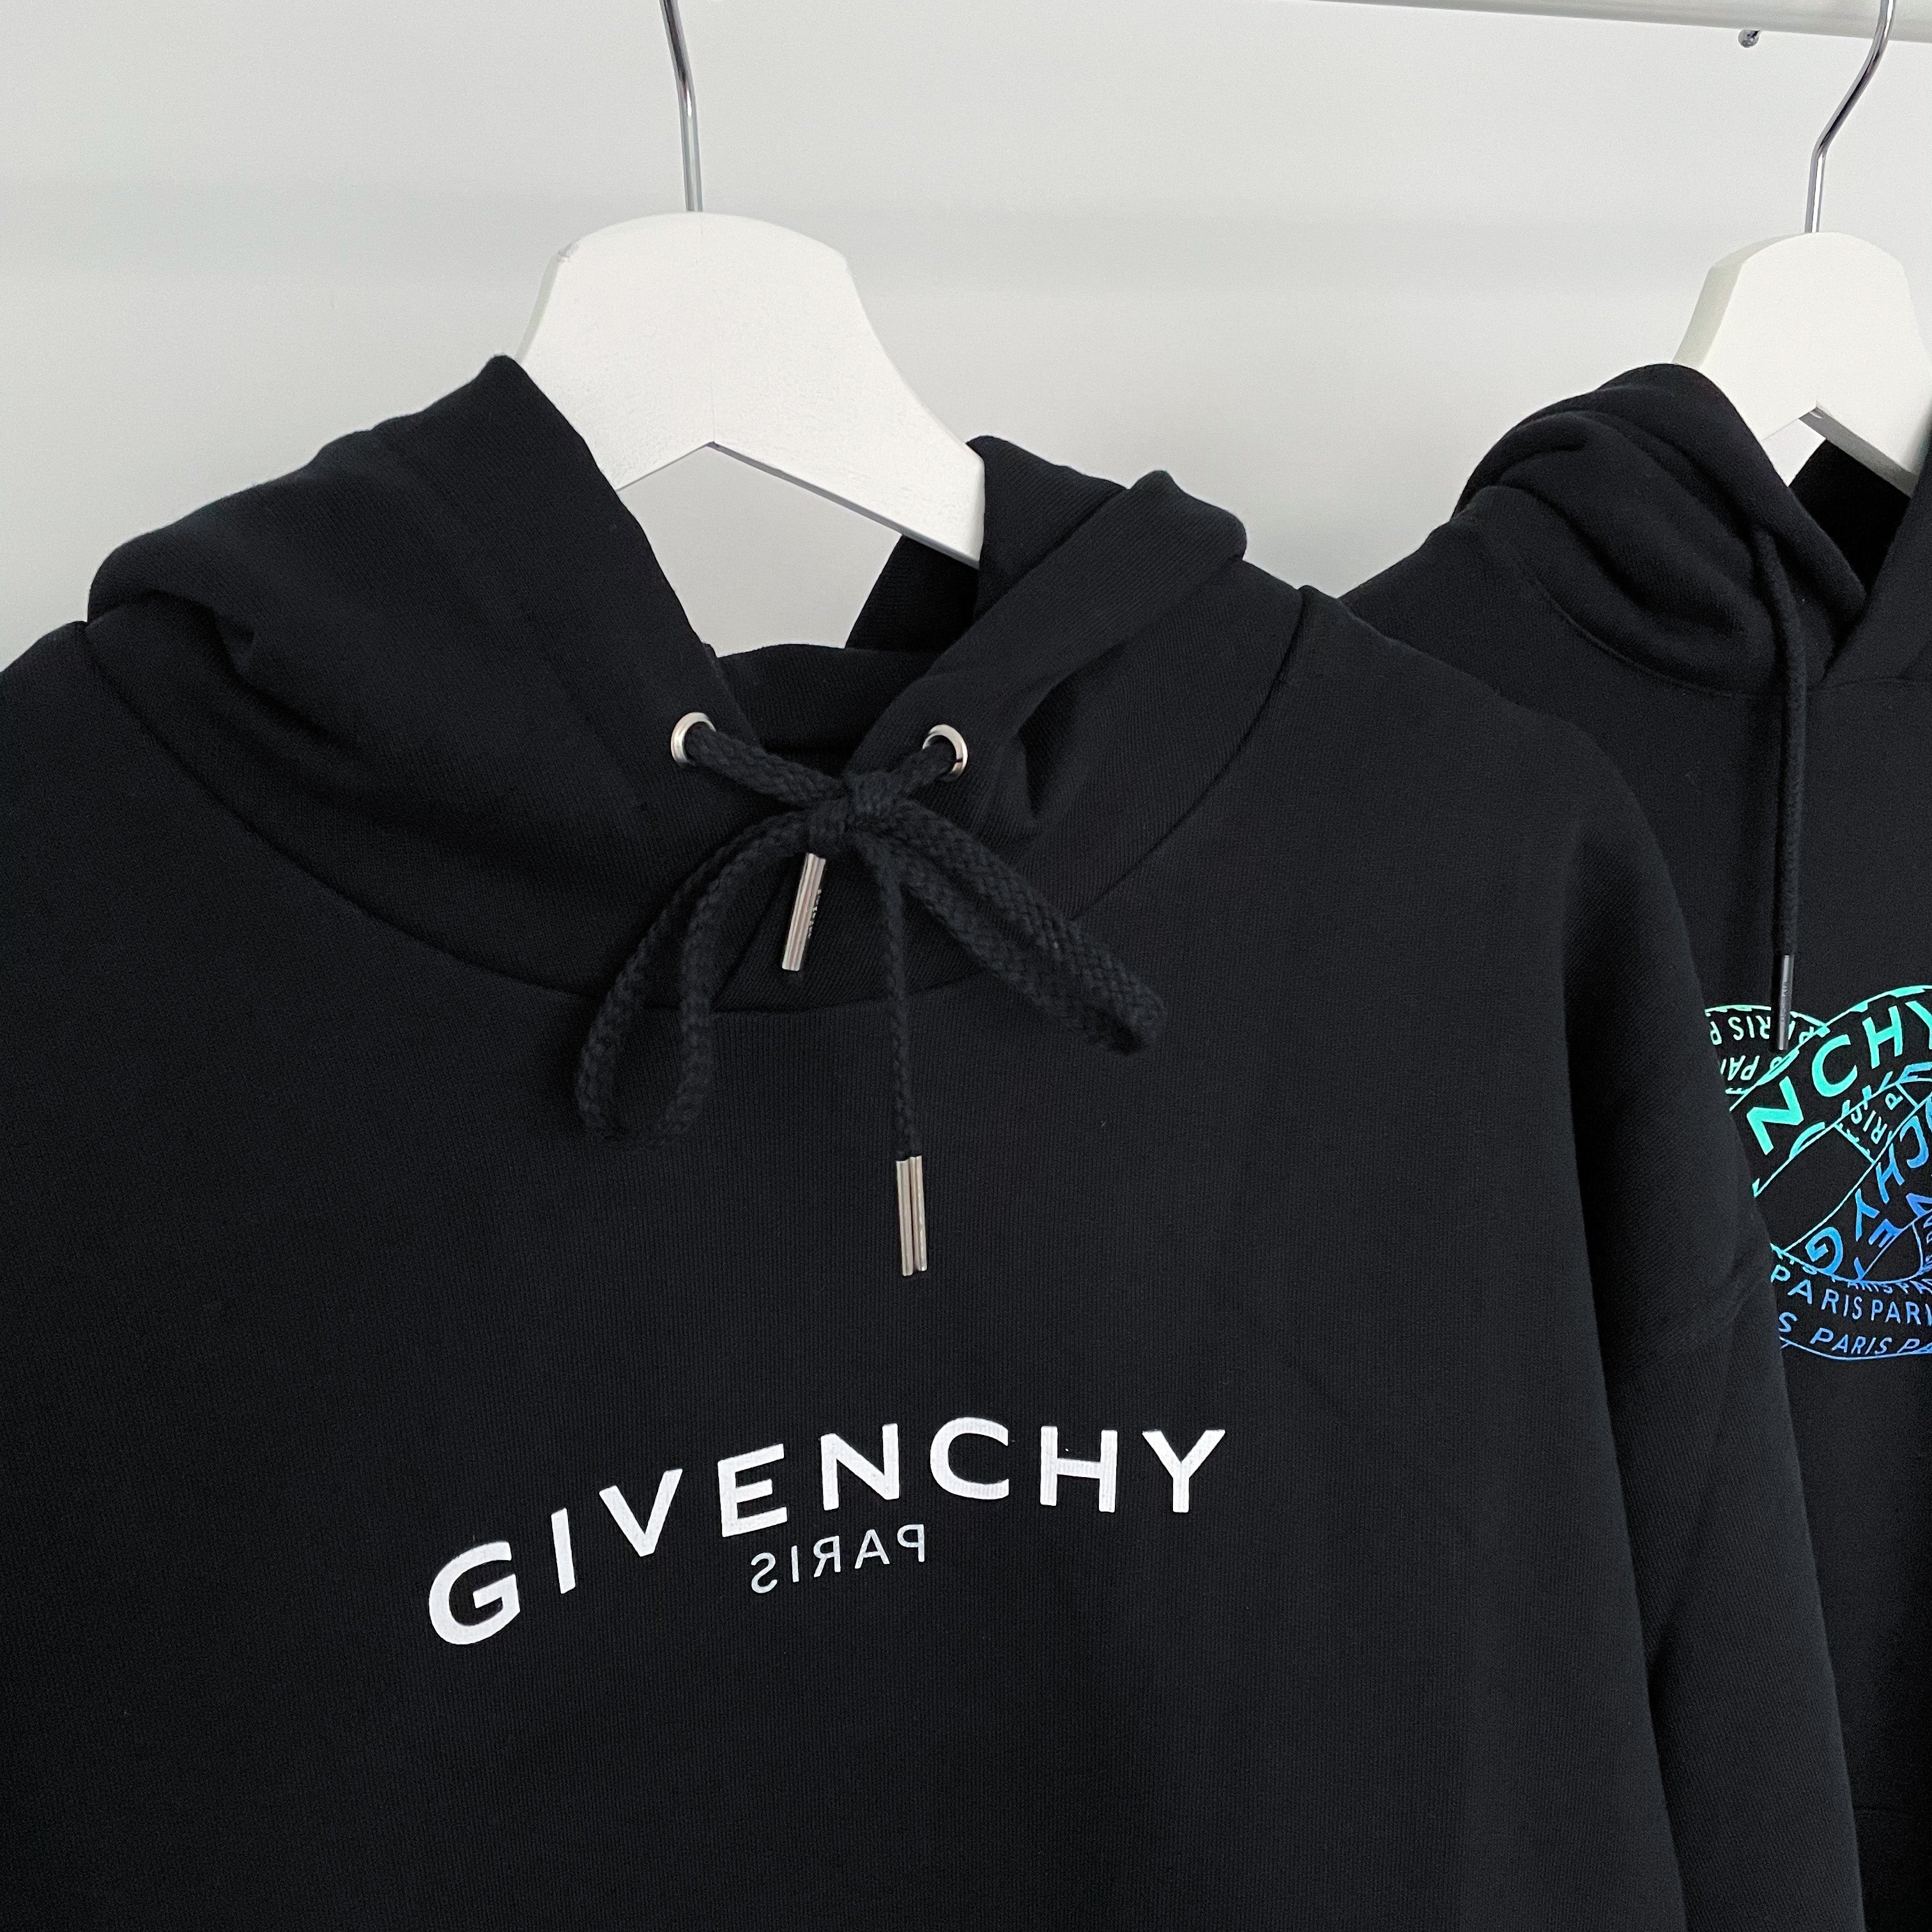 Givenchy Reverse Logo Hoodie